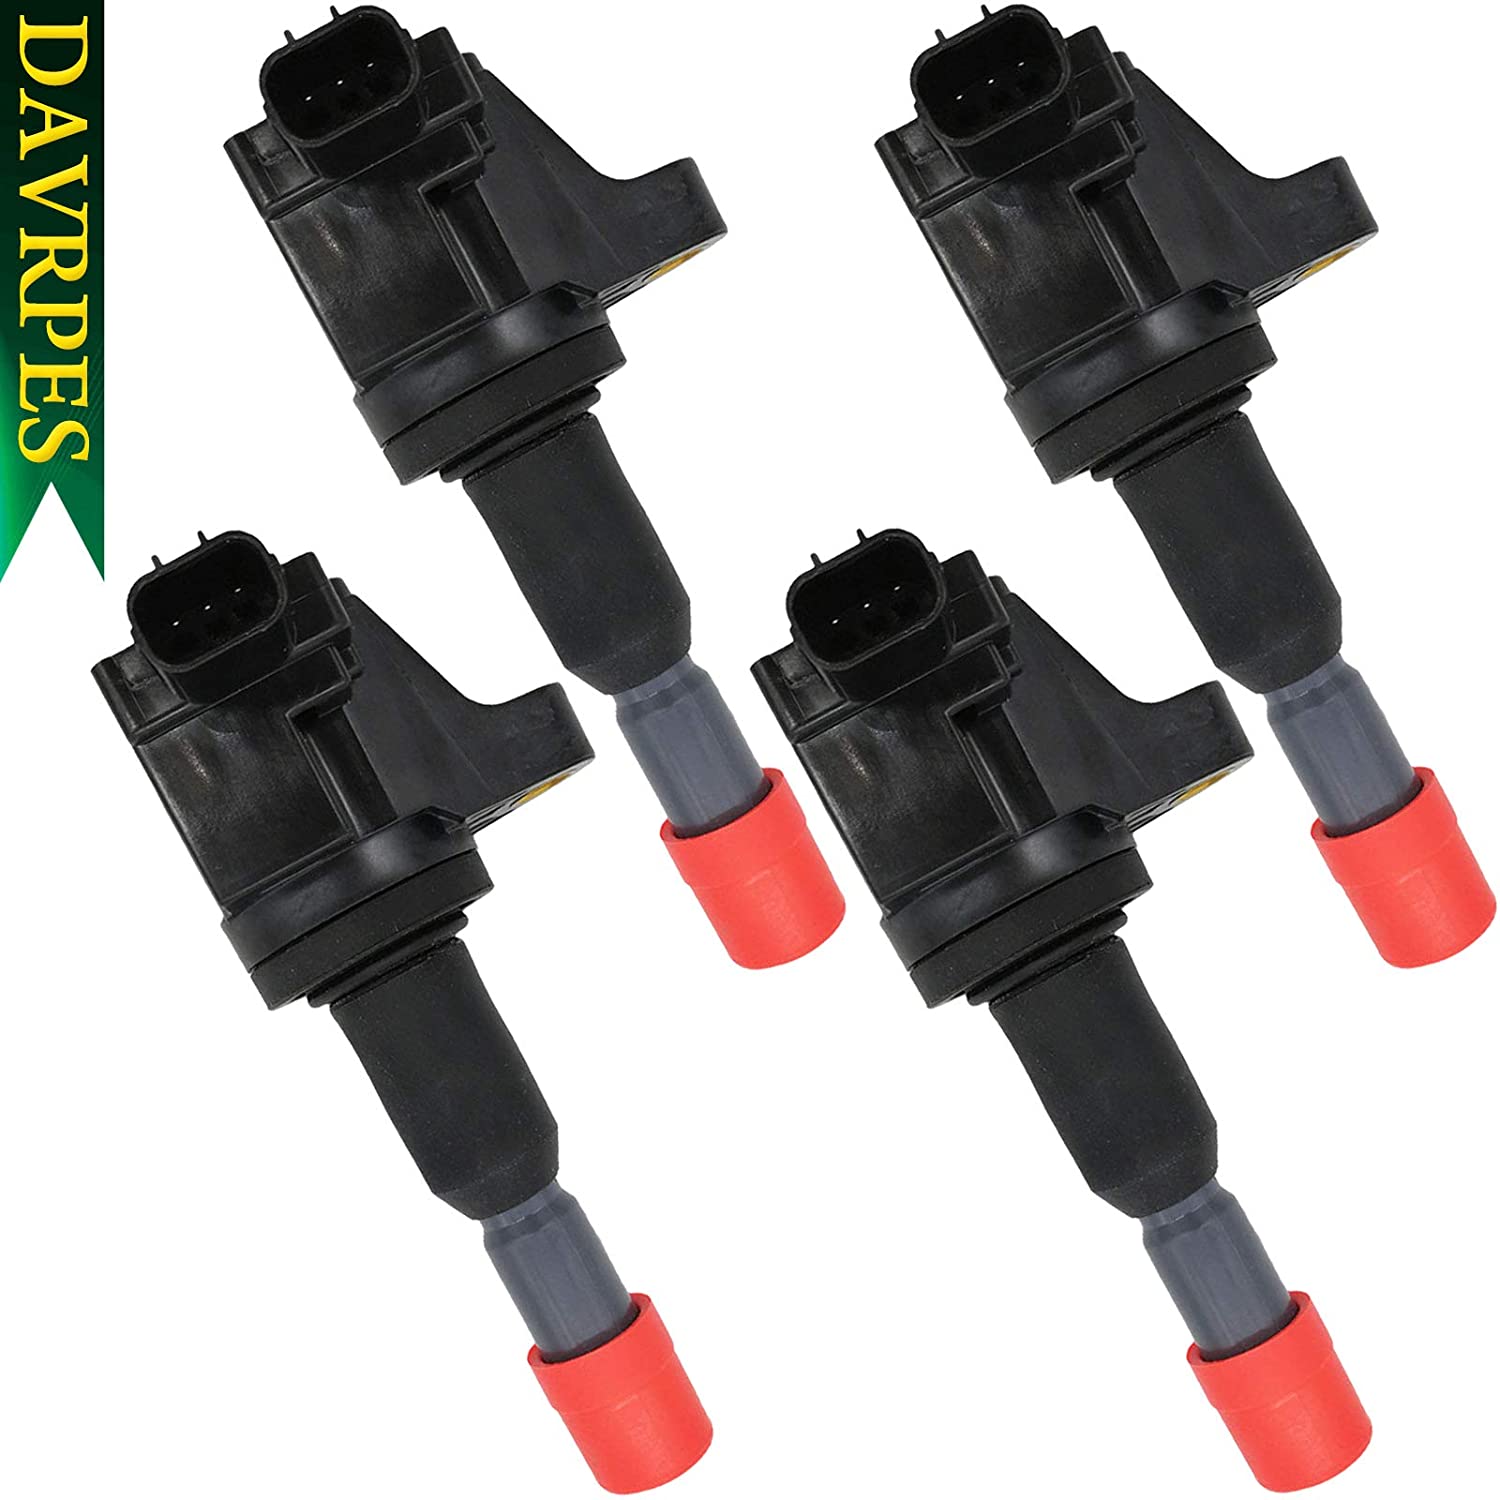 DAVRPES 4Pcs UF581 30520-PWC-003 Ignition Coils Pack For 2007 2008 Honda Fit 1.5L L4 Replace# 610-50119｜30520-PWC-S01｜5C1635｜C1578｜E1081